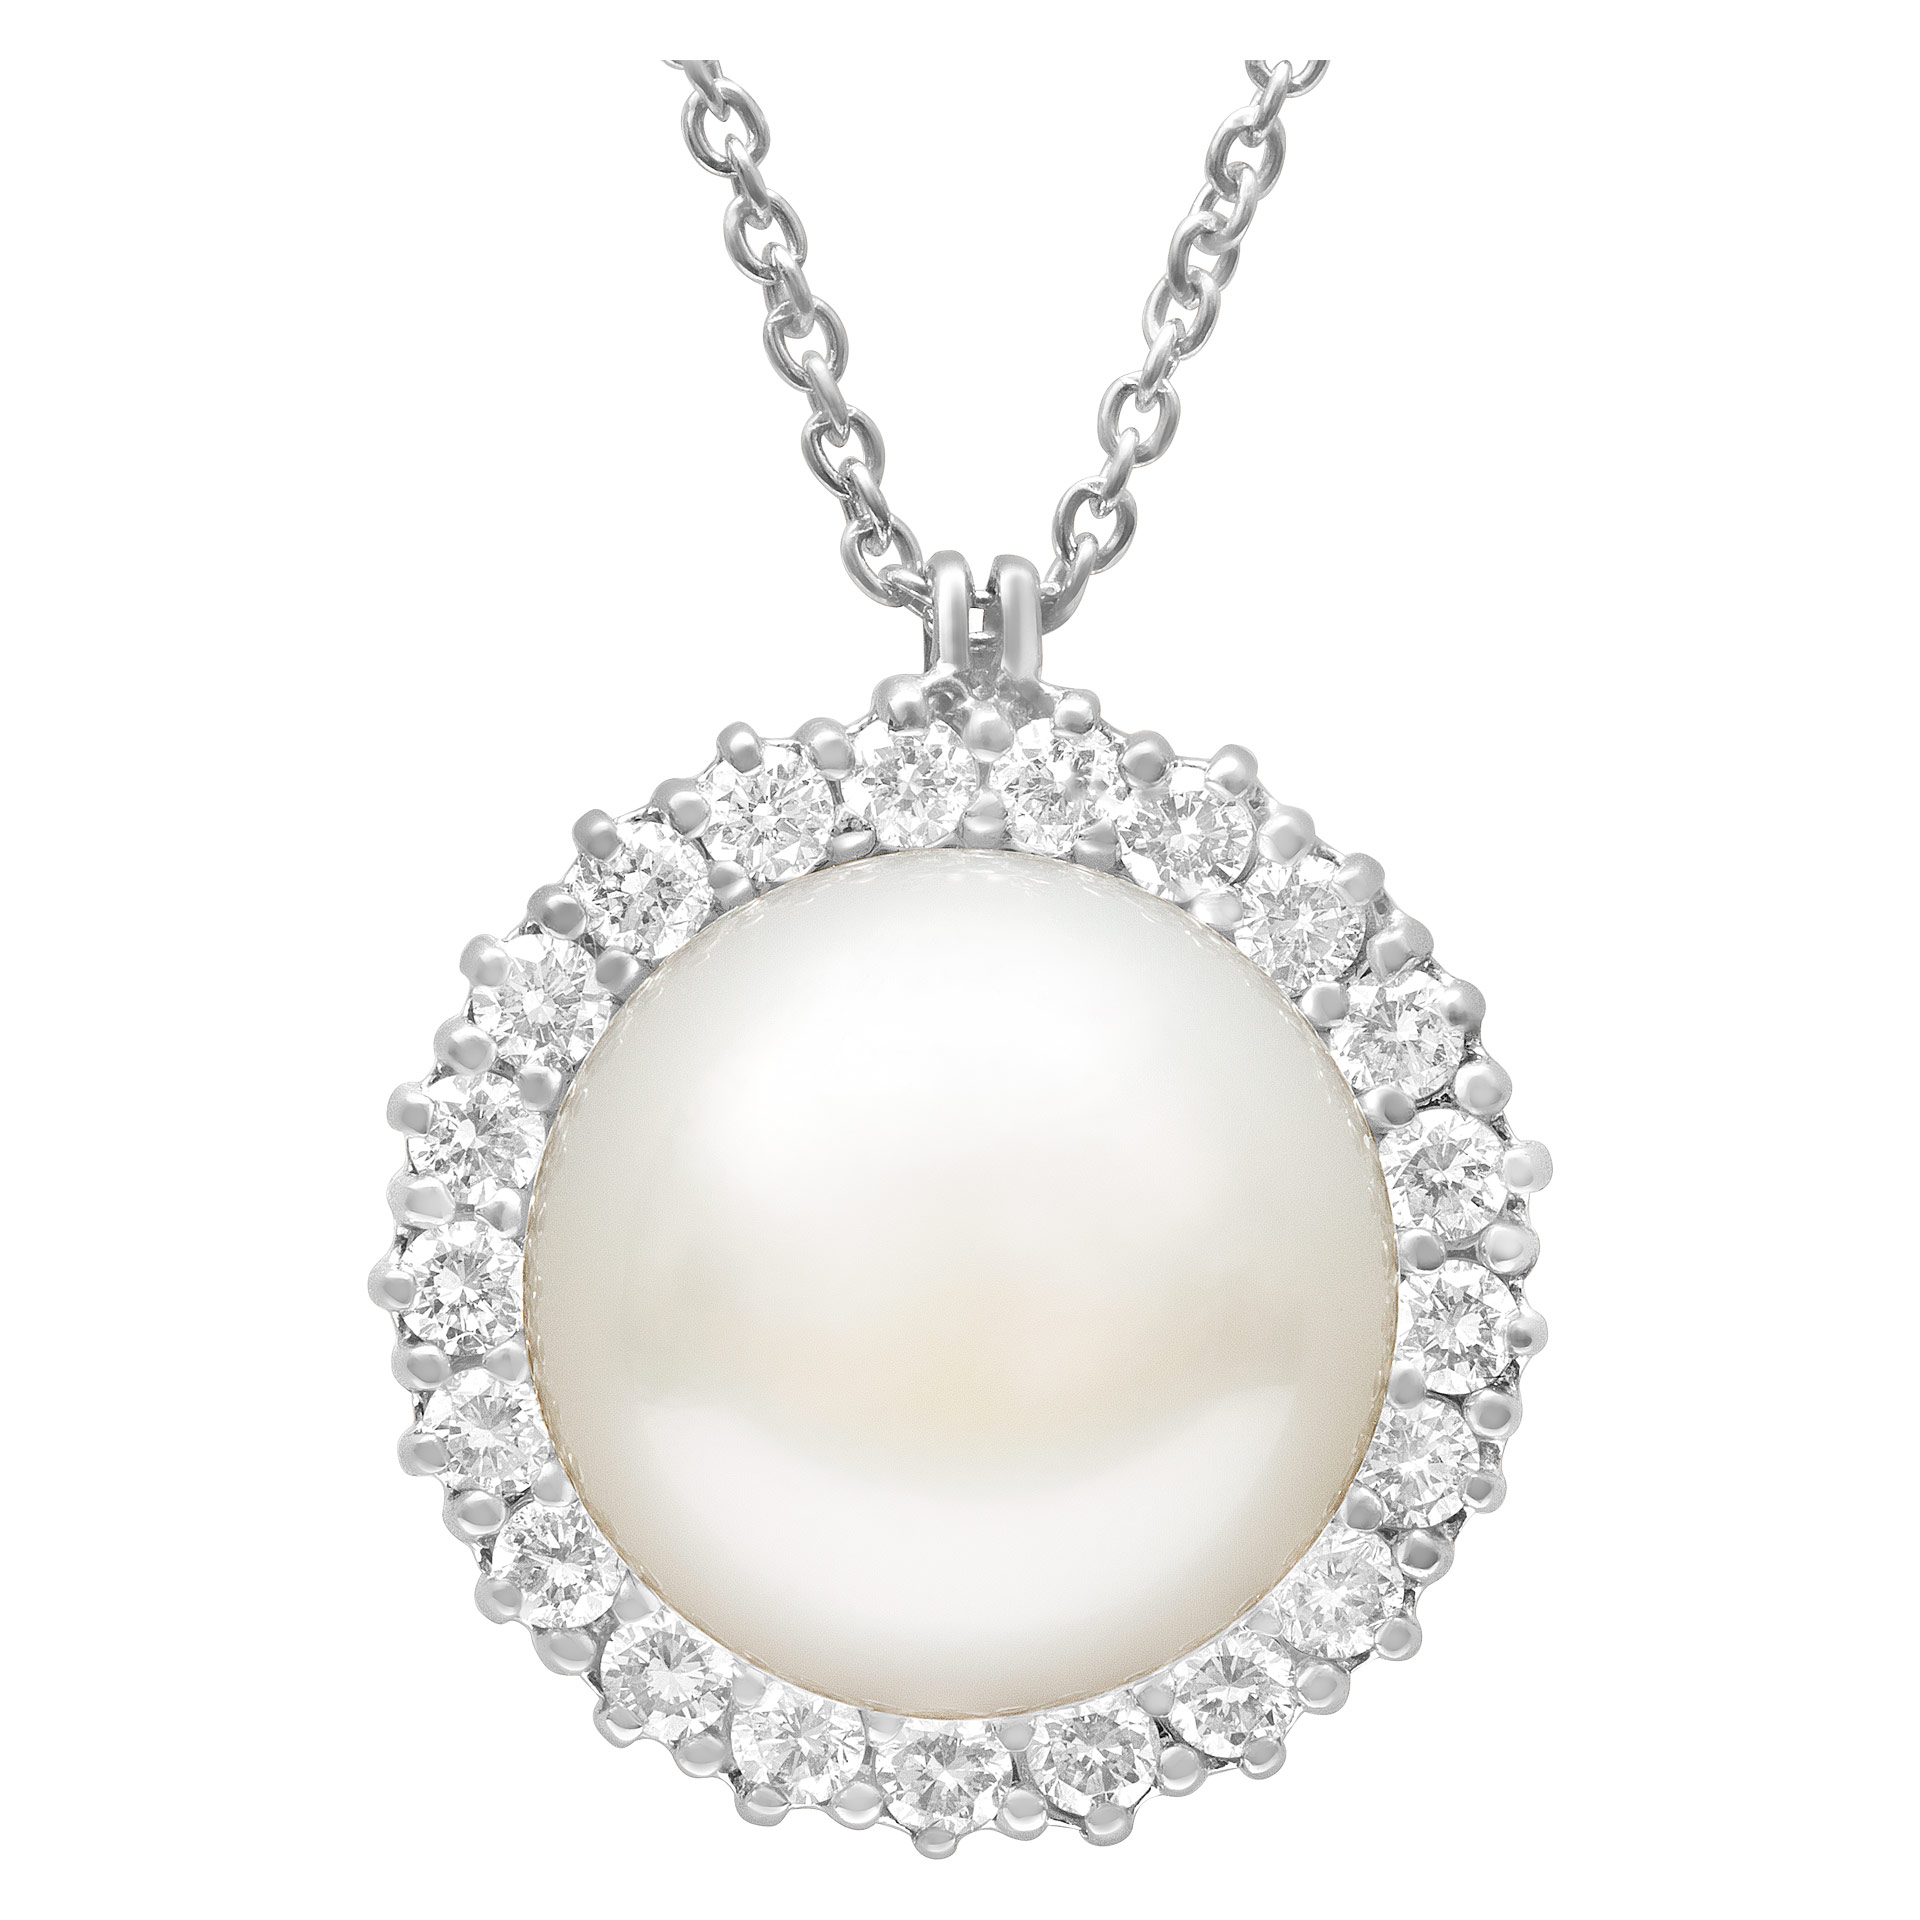 South sea pearl pendant necklace with diamonds in 18k white gold chain